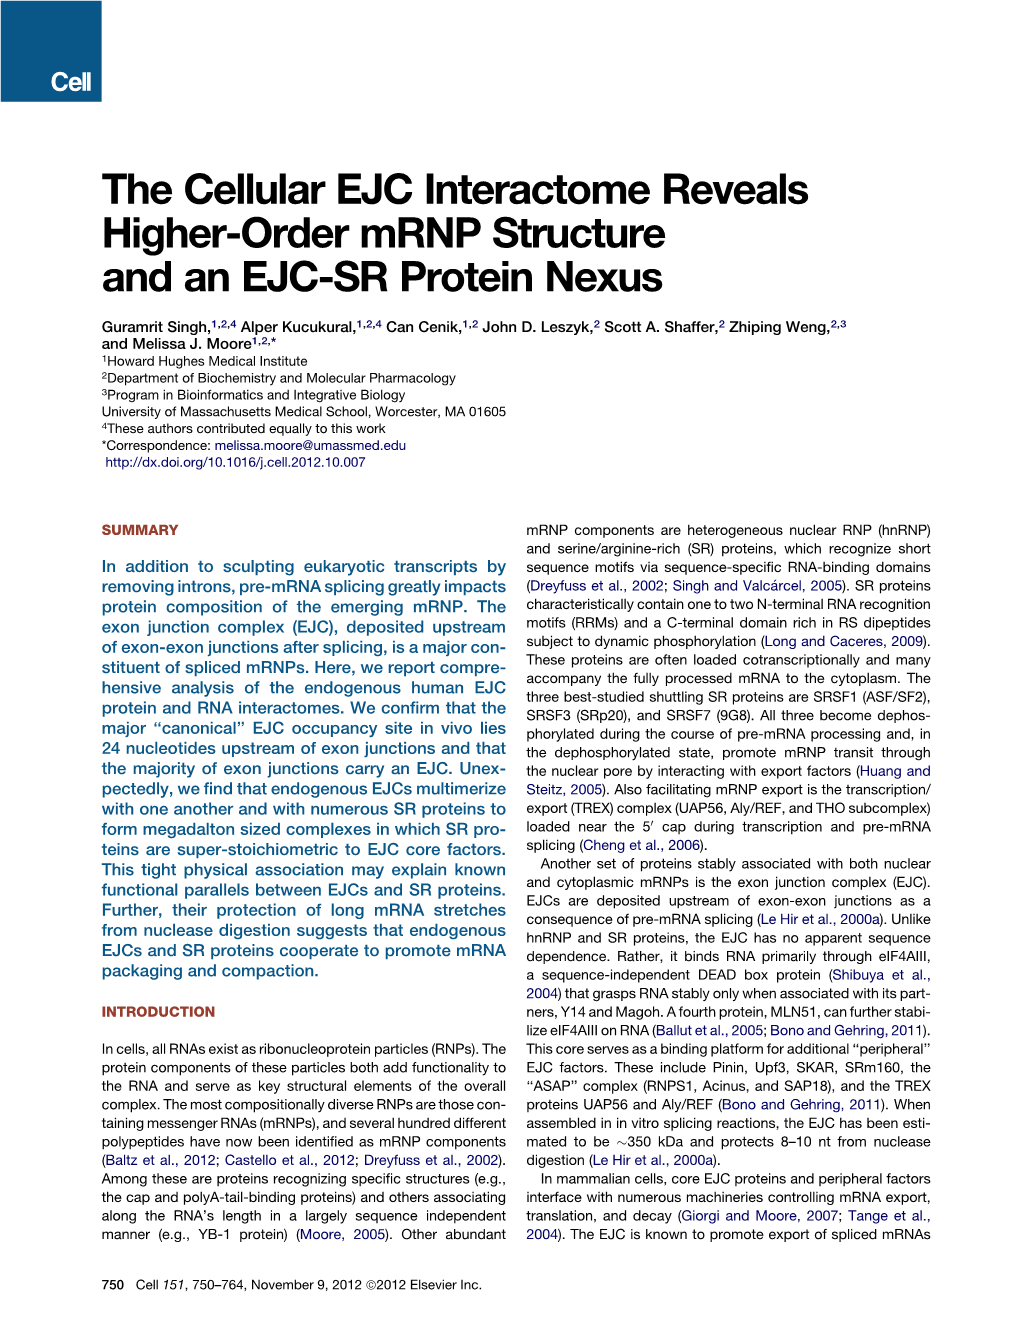 The Cellular EJC Interactome Reveals Higher-Order Mrnp Structure Andanejc-Srproteinnexus